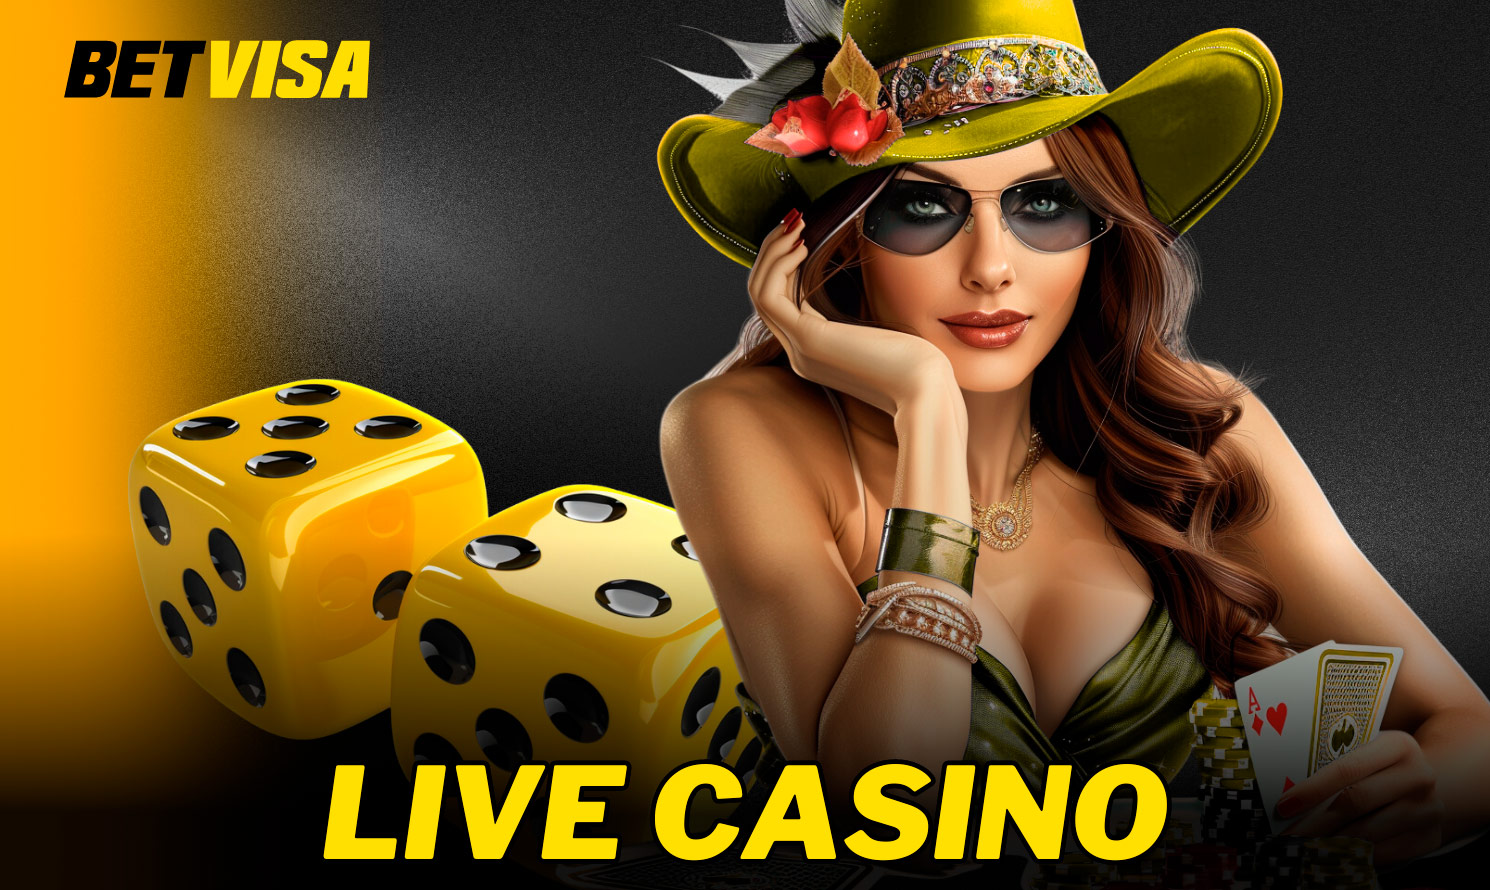 Experience the Ultimate Live Casino Action with BetVisa